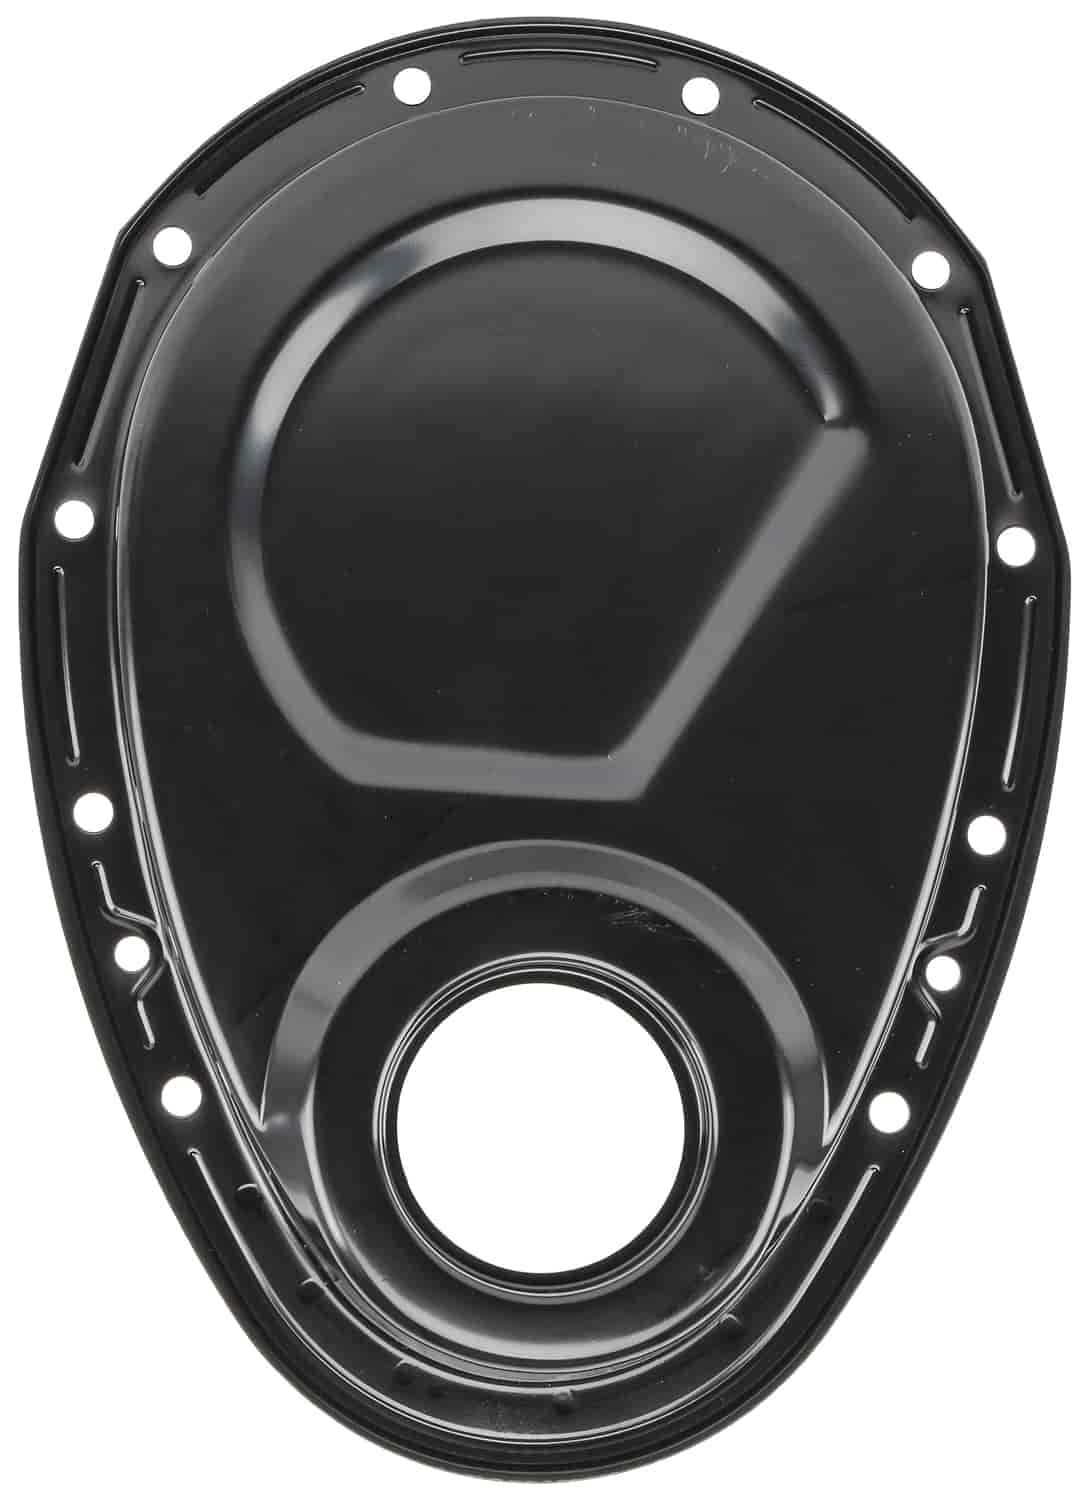 Timing Cover for 1955-1995 Small Block Chevy 283-400 [Black]